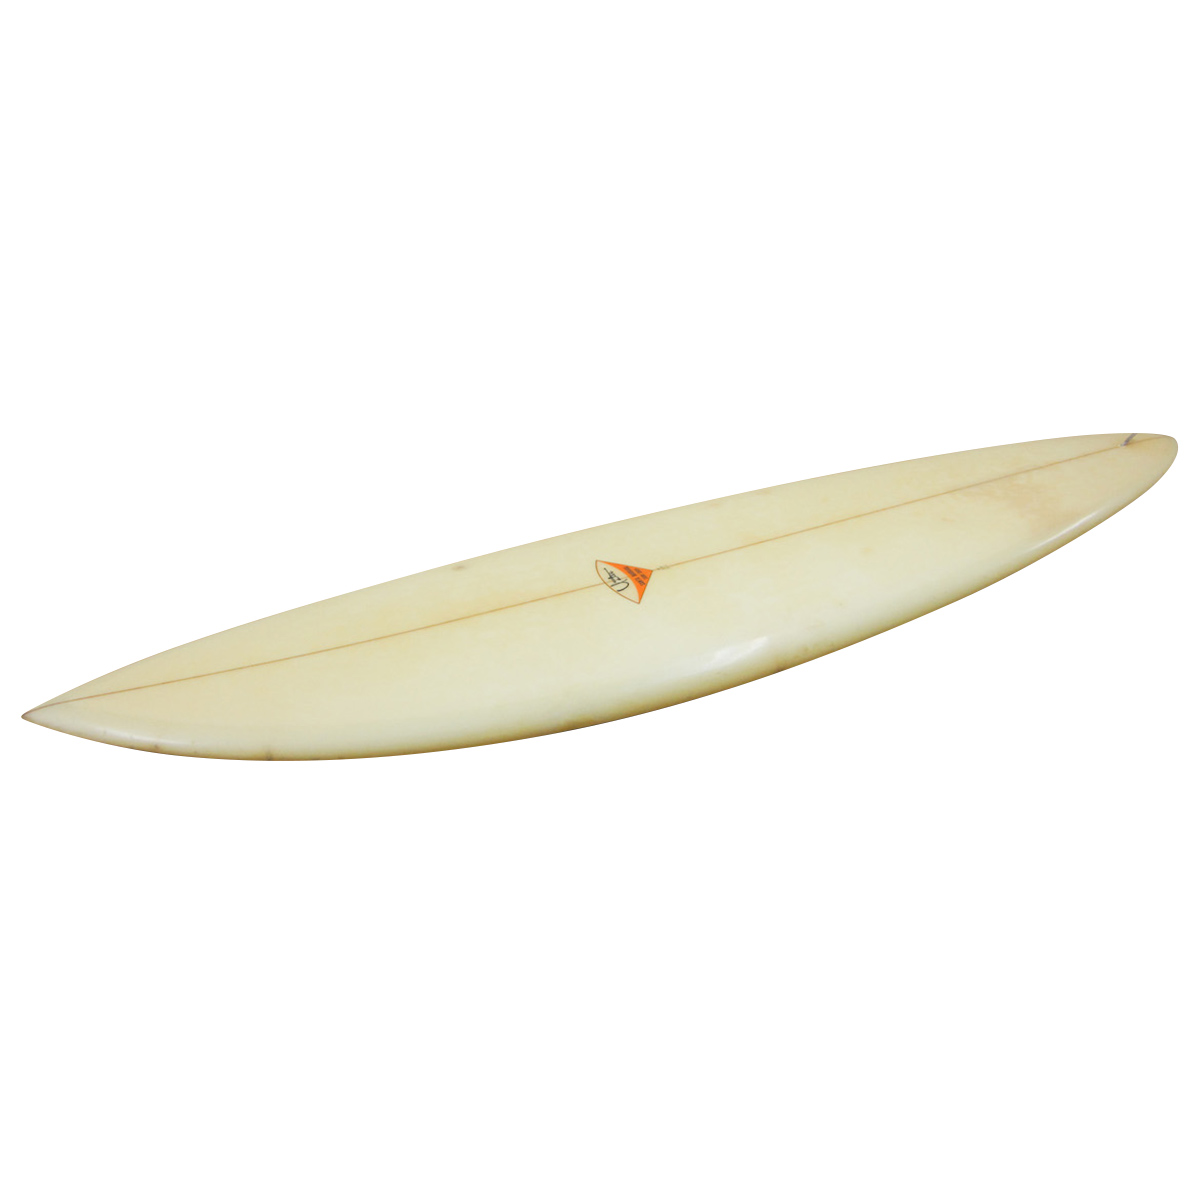 Yater surfboards / RATE 70`s Single Shaped by RENNY  YATER